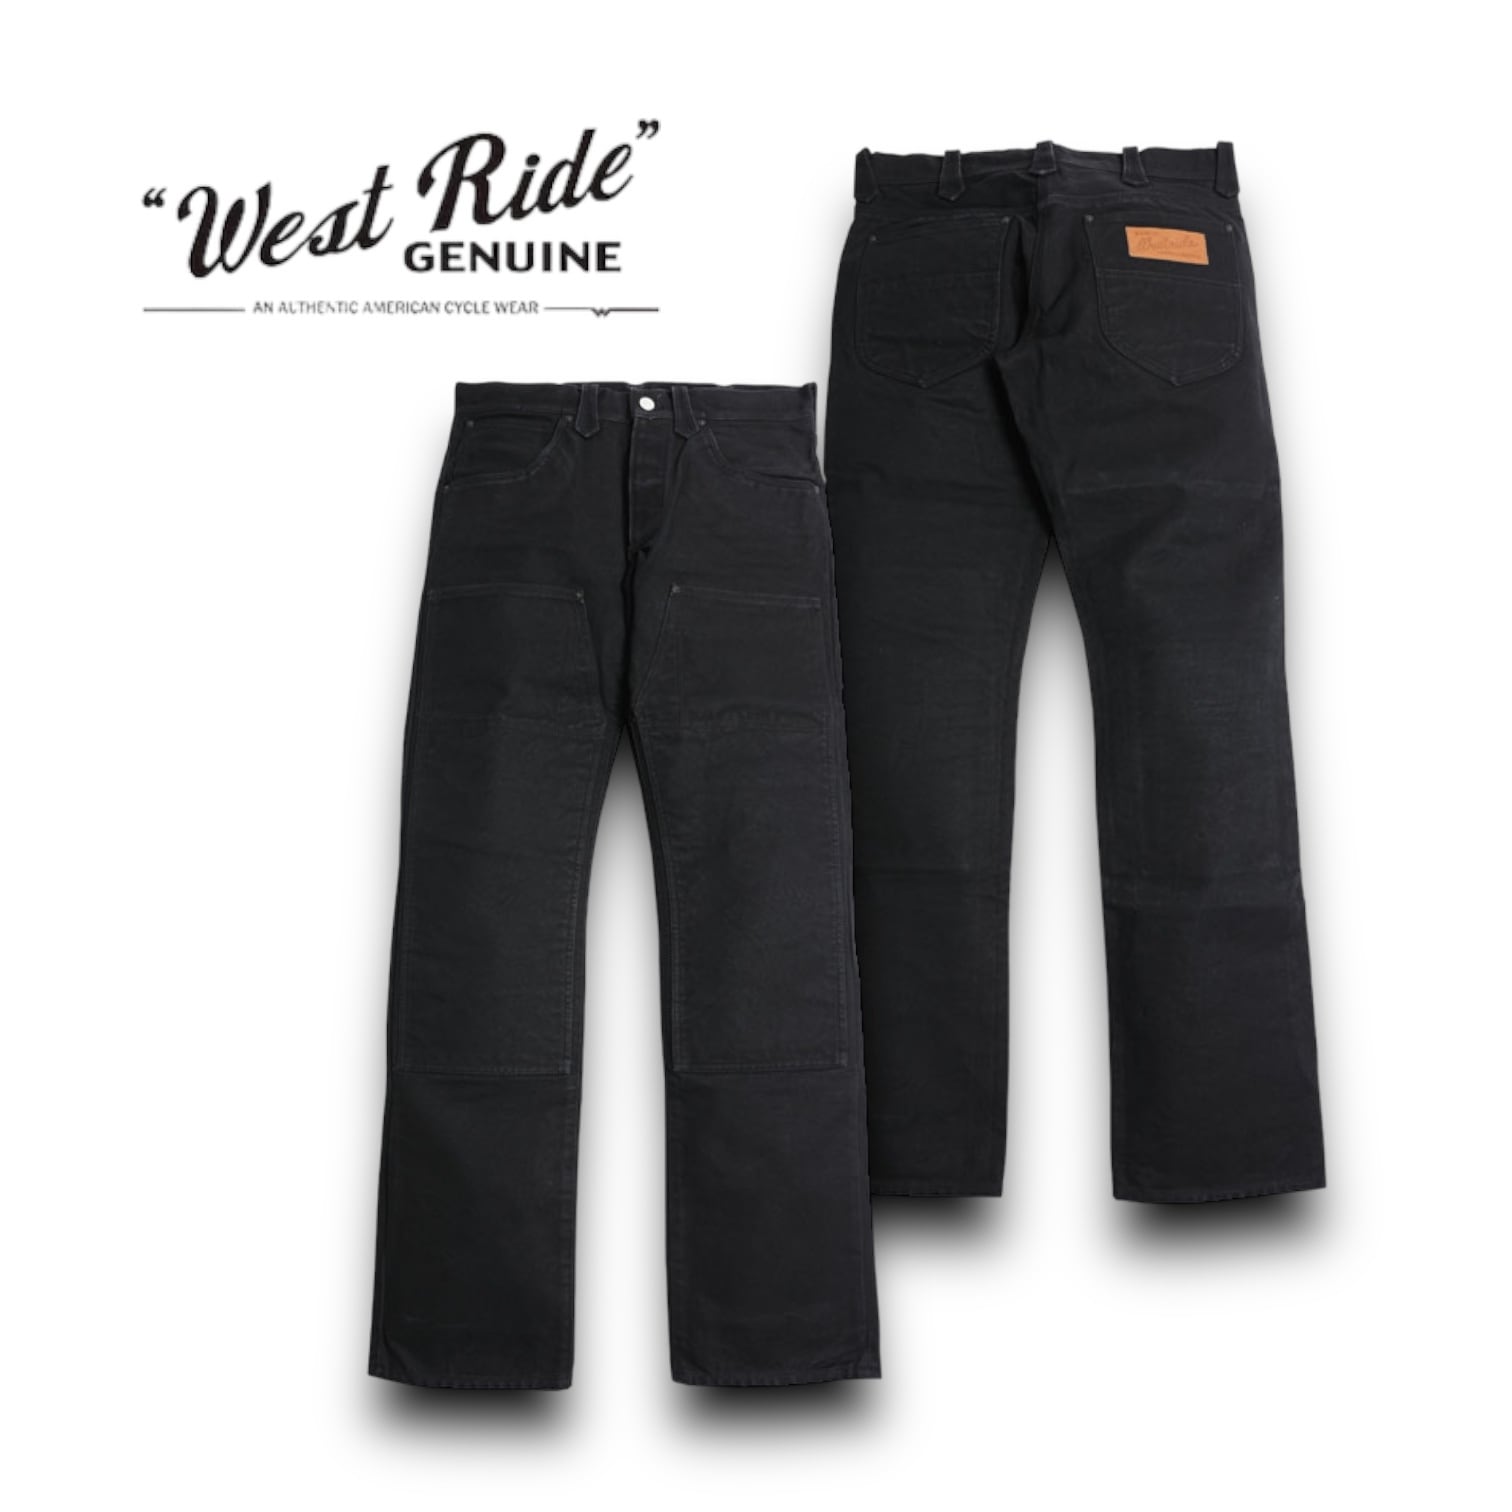 WESTRIDE | BETTON CLOTHING